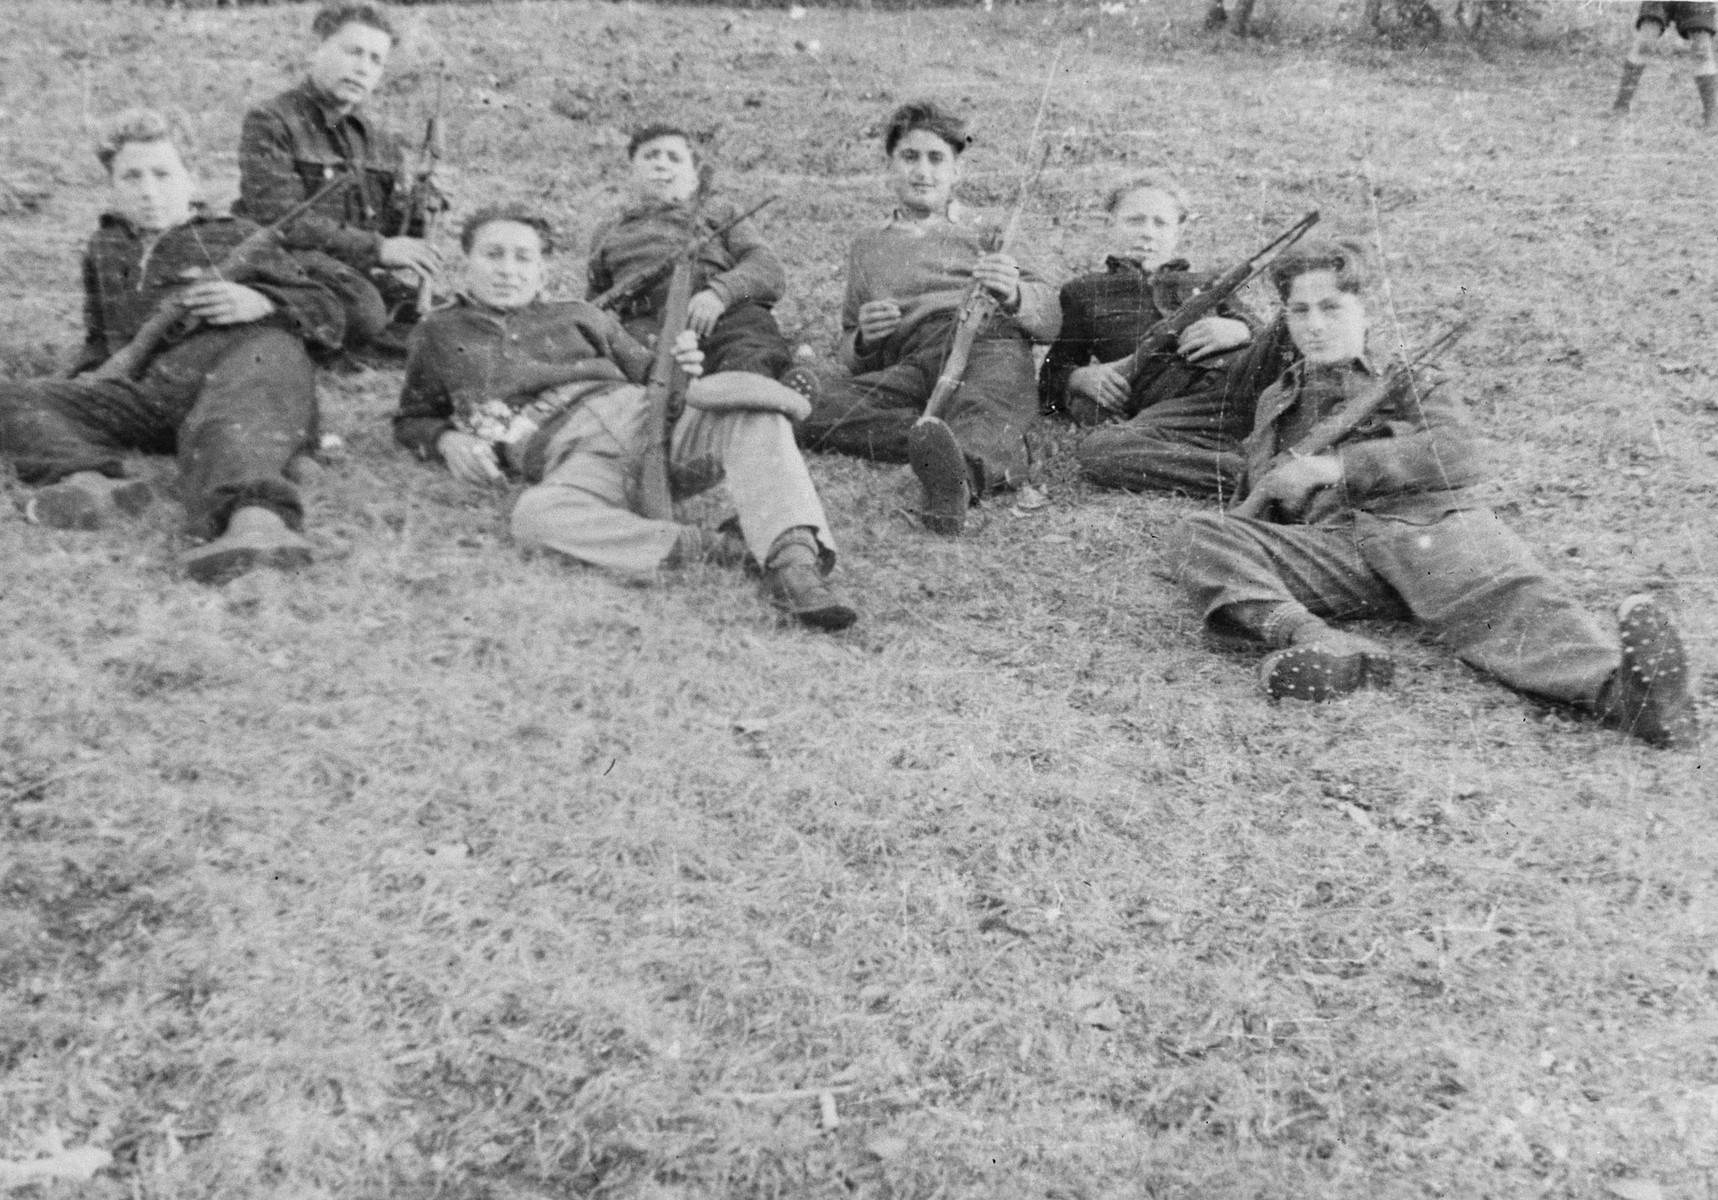 Teenage boys lie in the grass holding weapons during paramilitary training in the Selvino children's home.

The boys were issued real weapons, Italian 22 caliber guns with attached bayonets, but no ammunition.